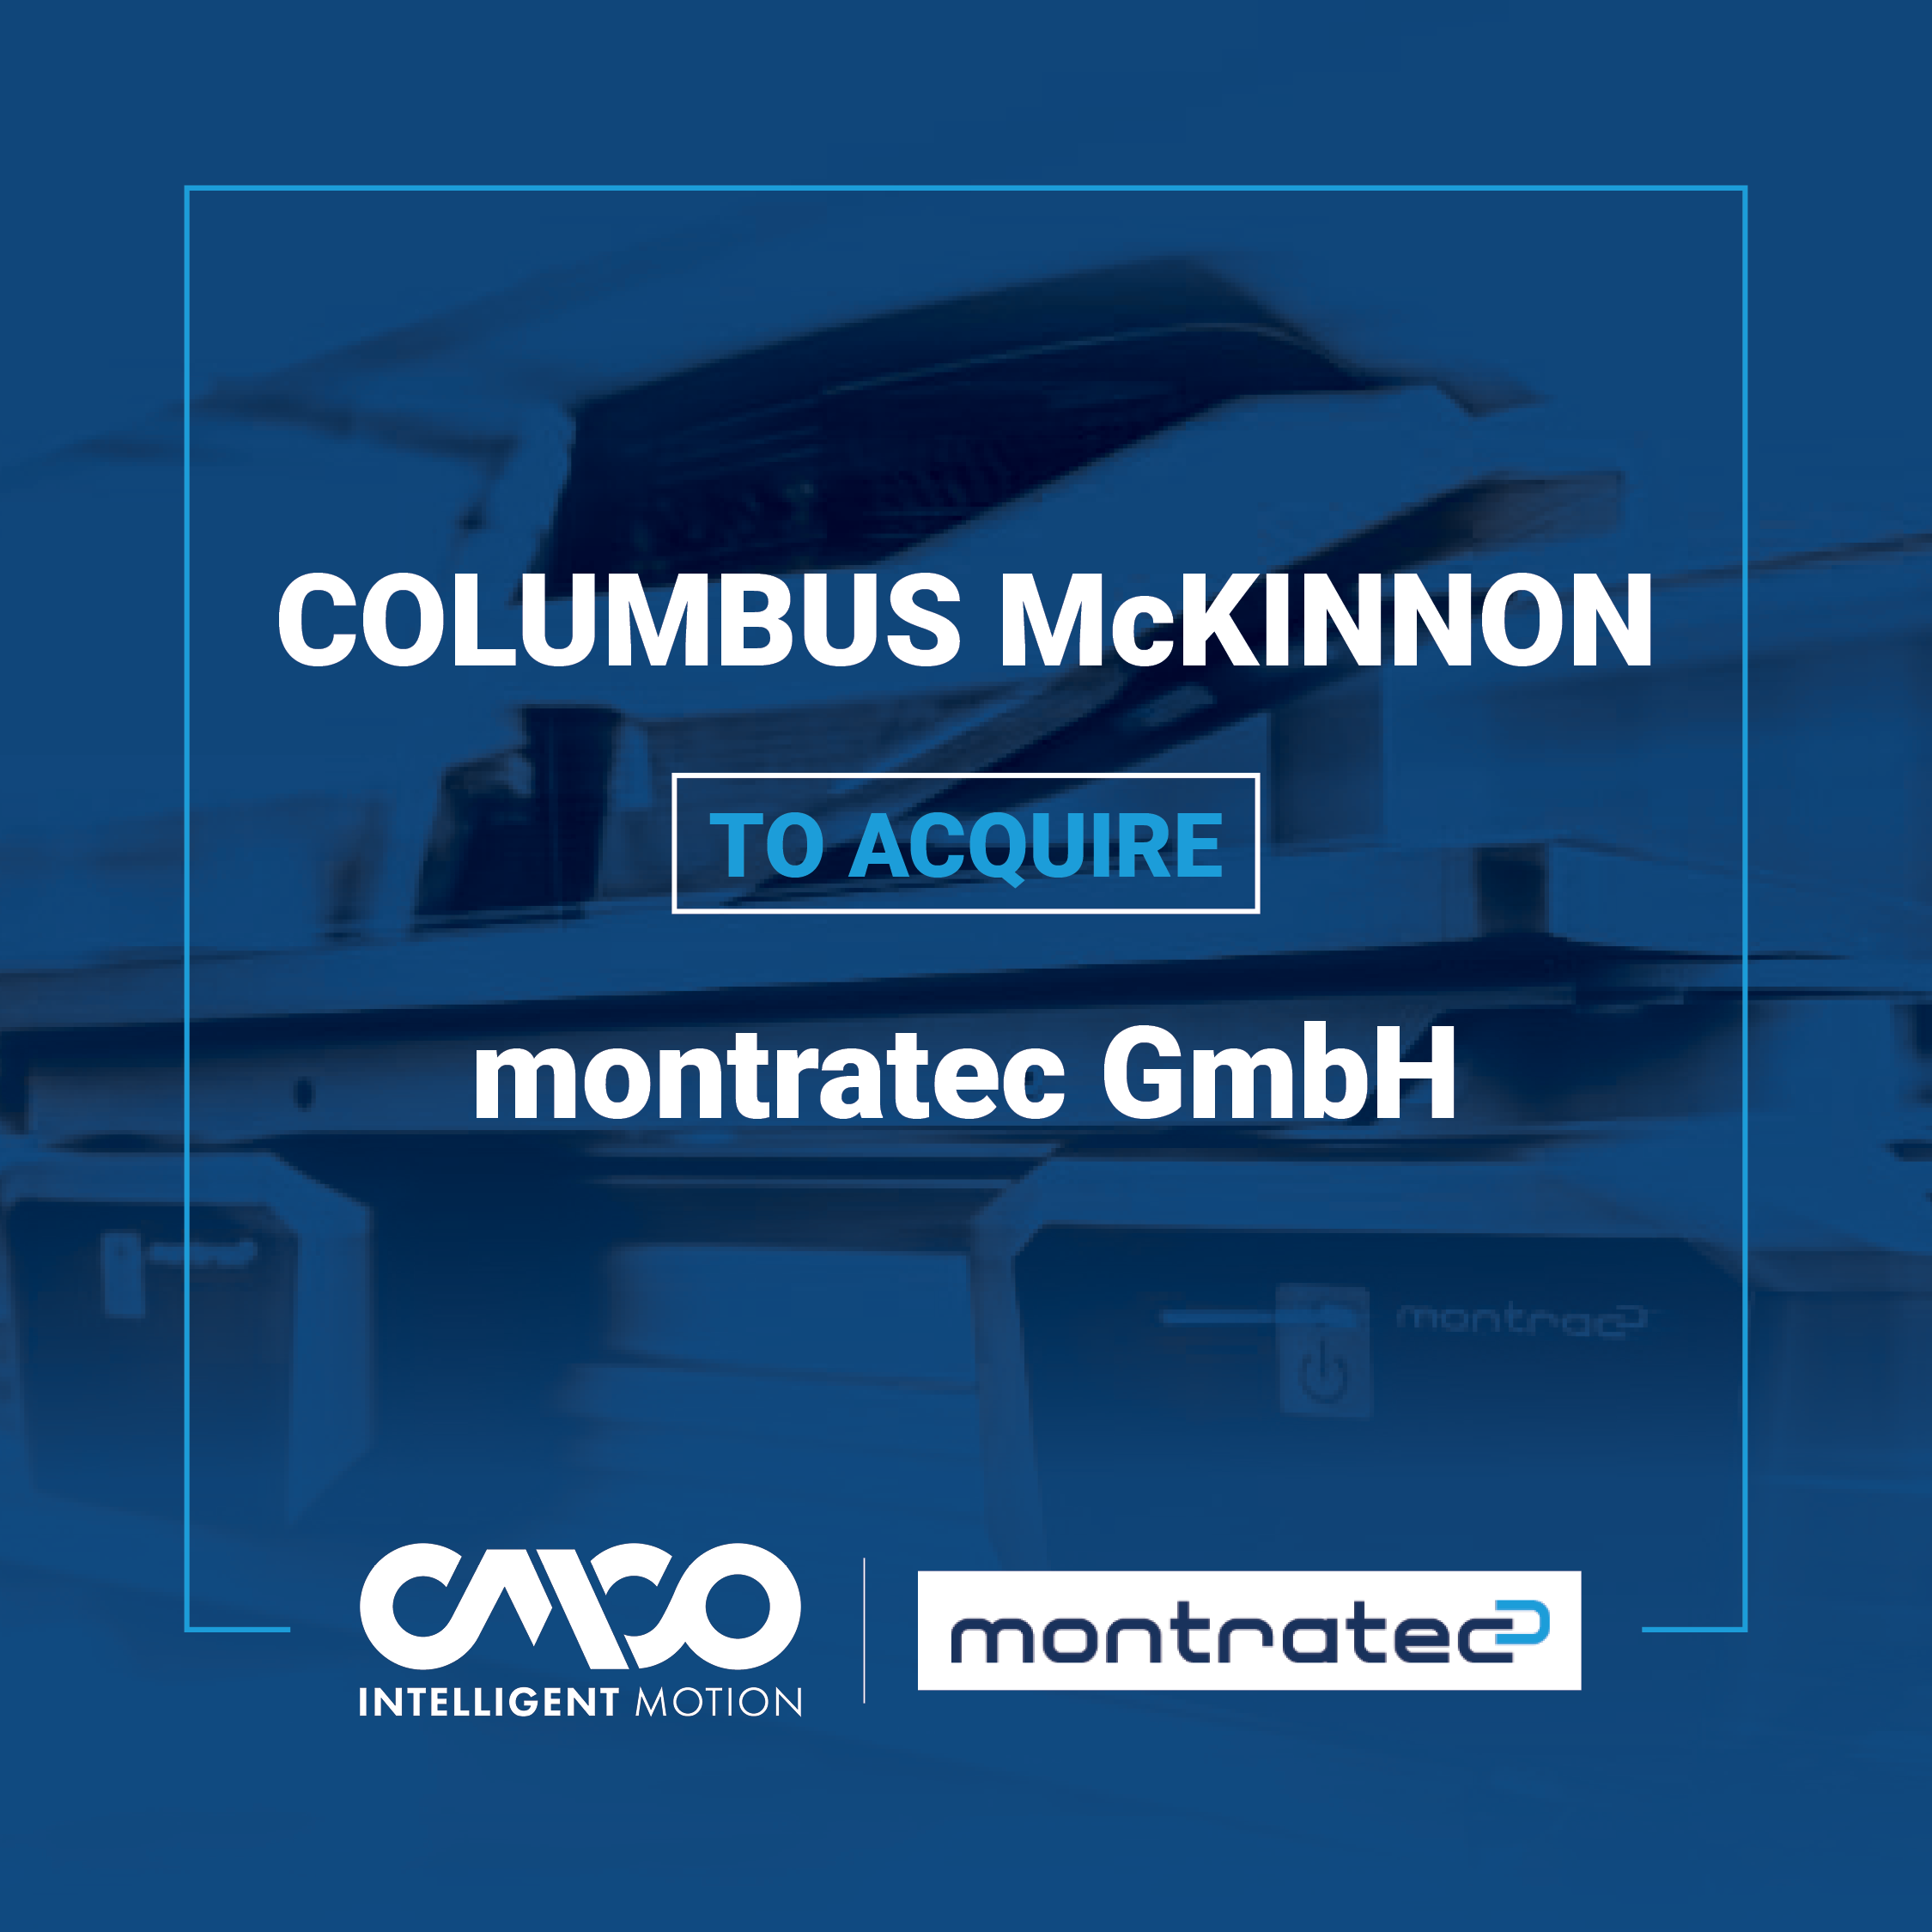 Columbus McKinnon to Acquire montratec GmnH announcement with company logos